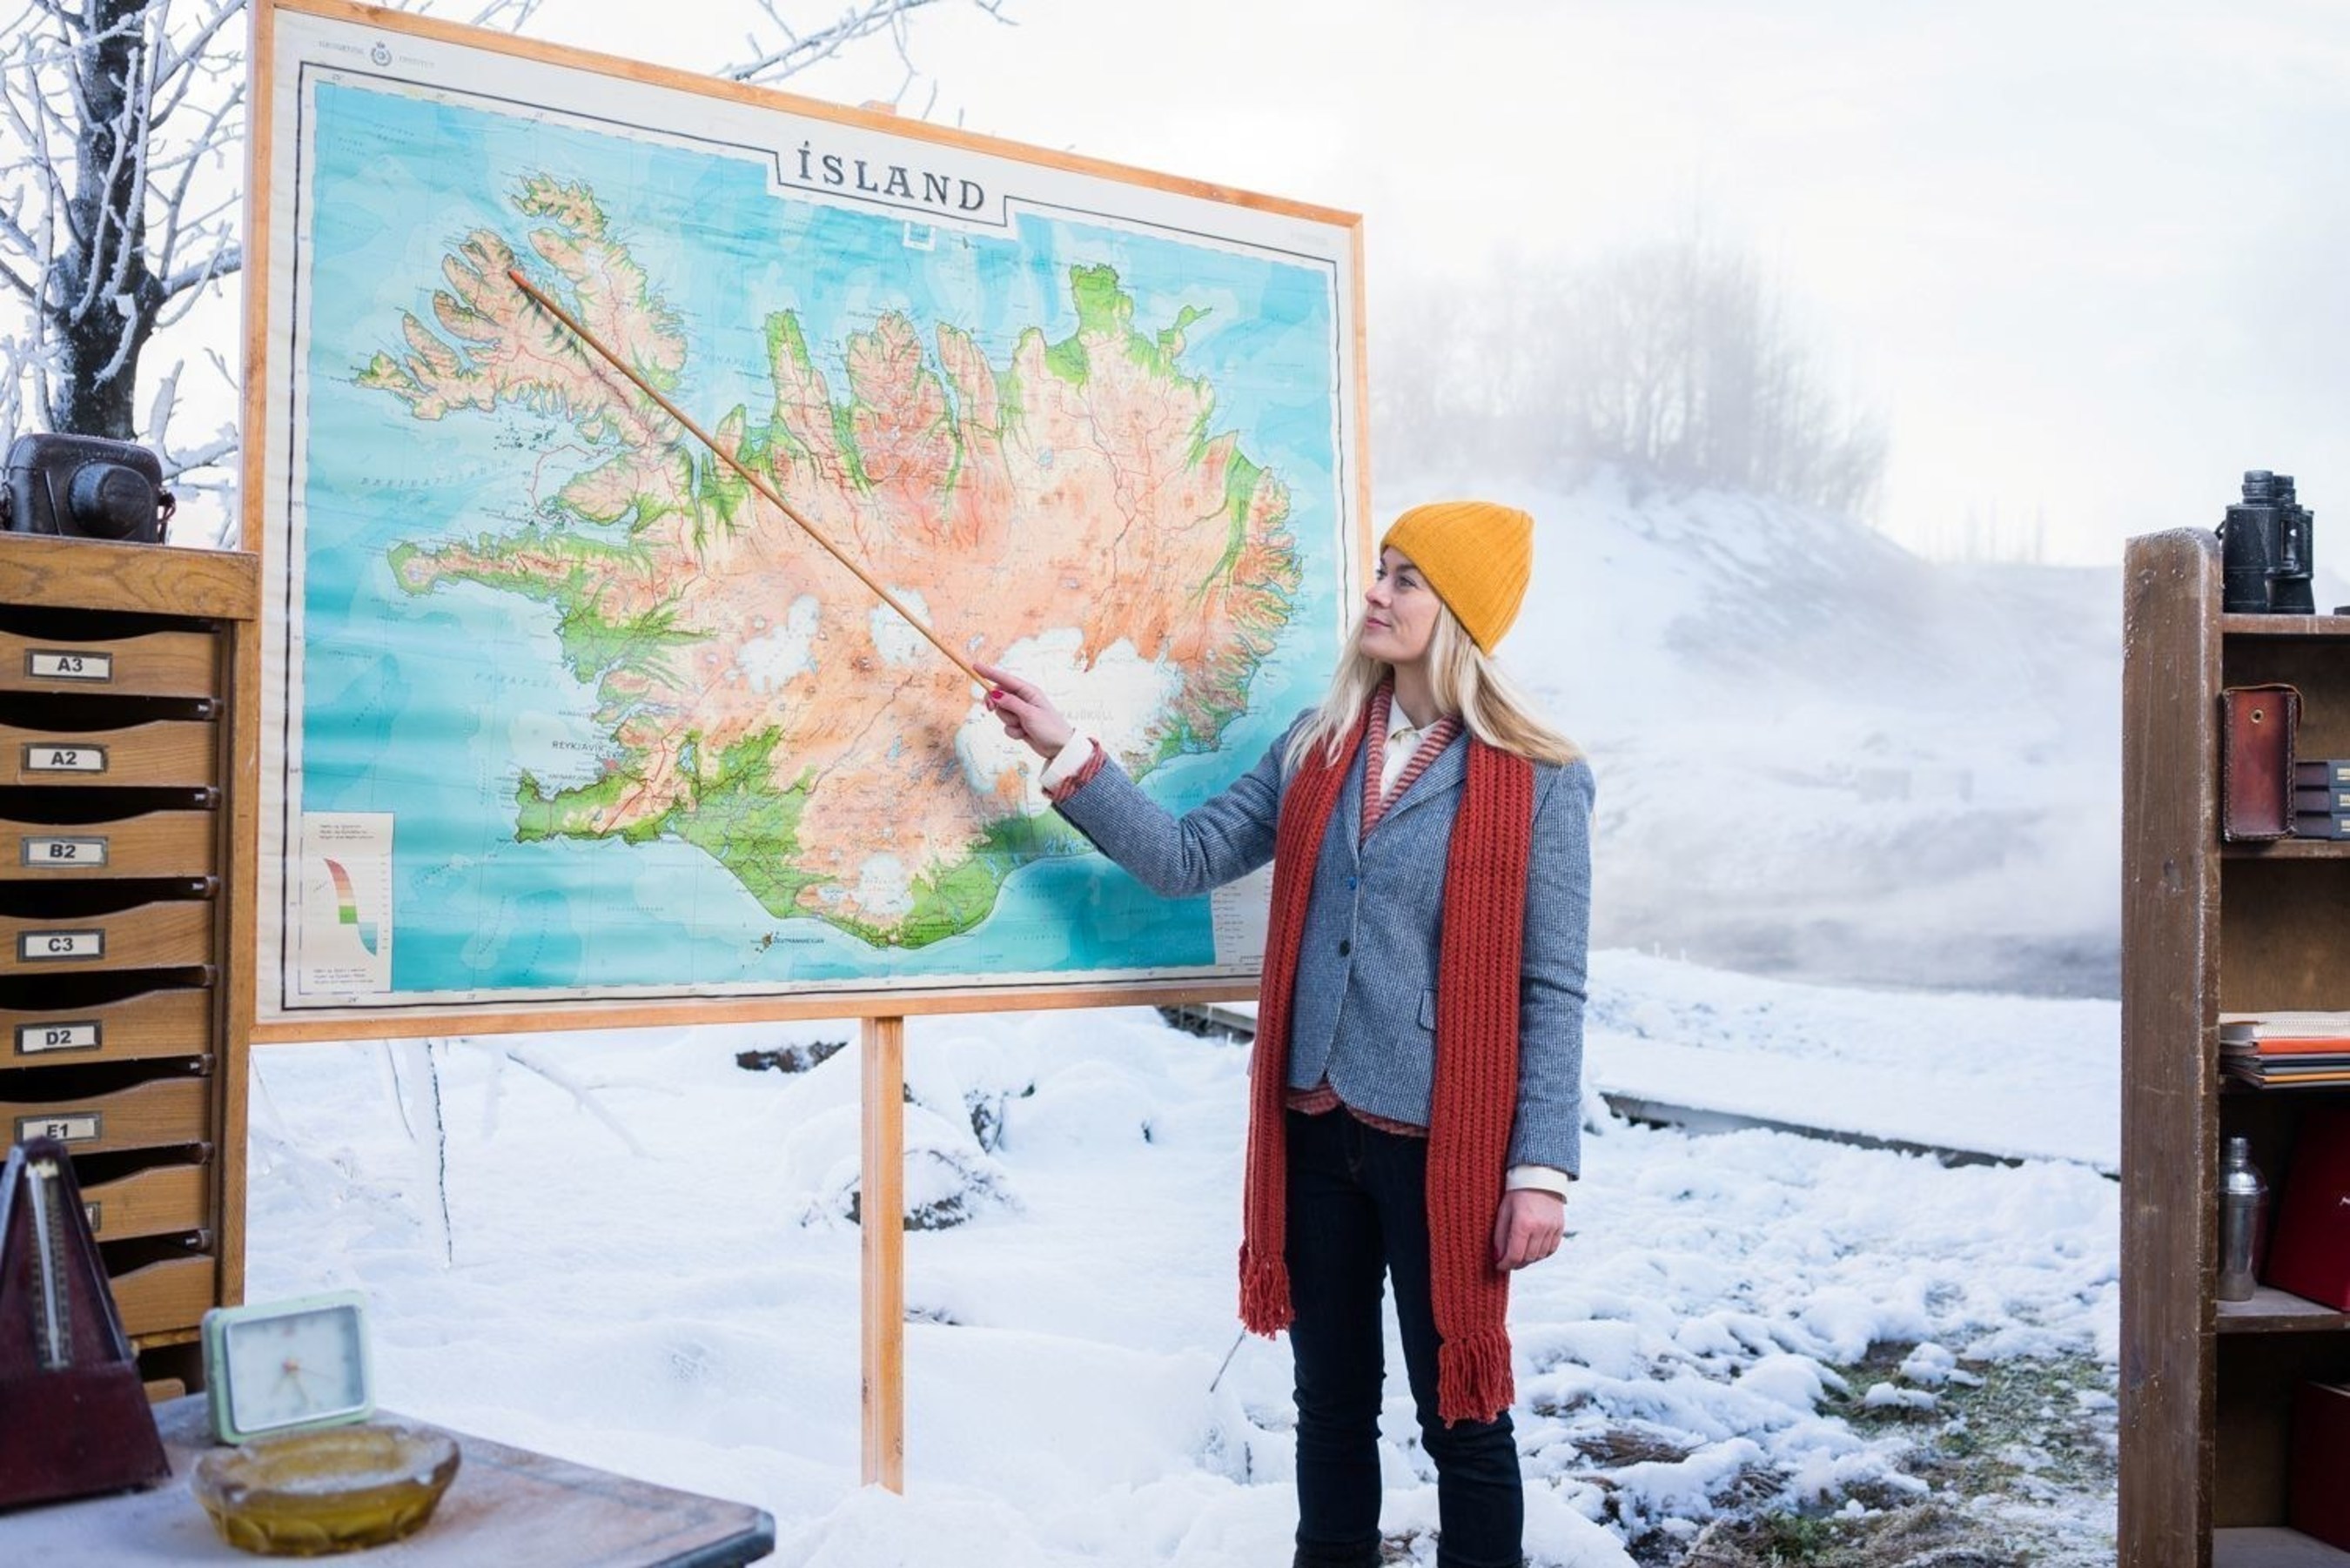 Inspired By Iceland launches new online video tutorial about how to travel further in Iceland as part of its Iceland Academy Winter timetable (PRNewsFoto/Inspired by Iceland)